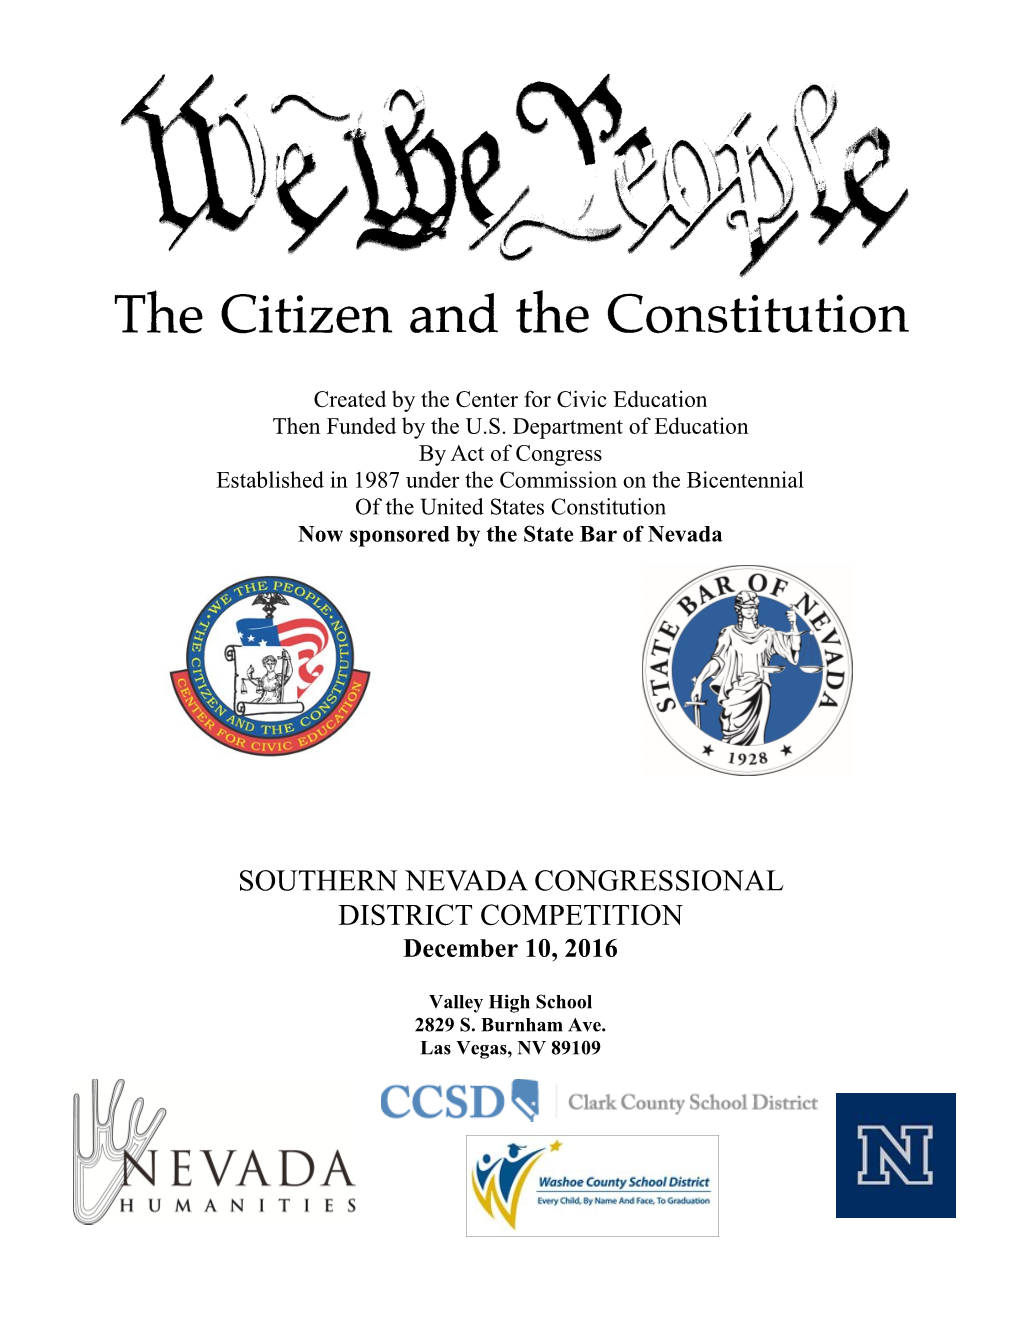 SOUTHERN NEVADA CONGRESSIONAL DISTRICT COMPETITION December 10, 2016